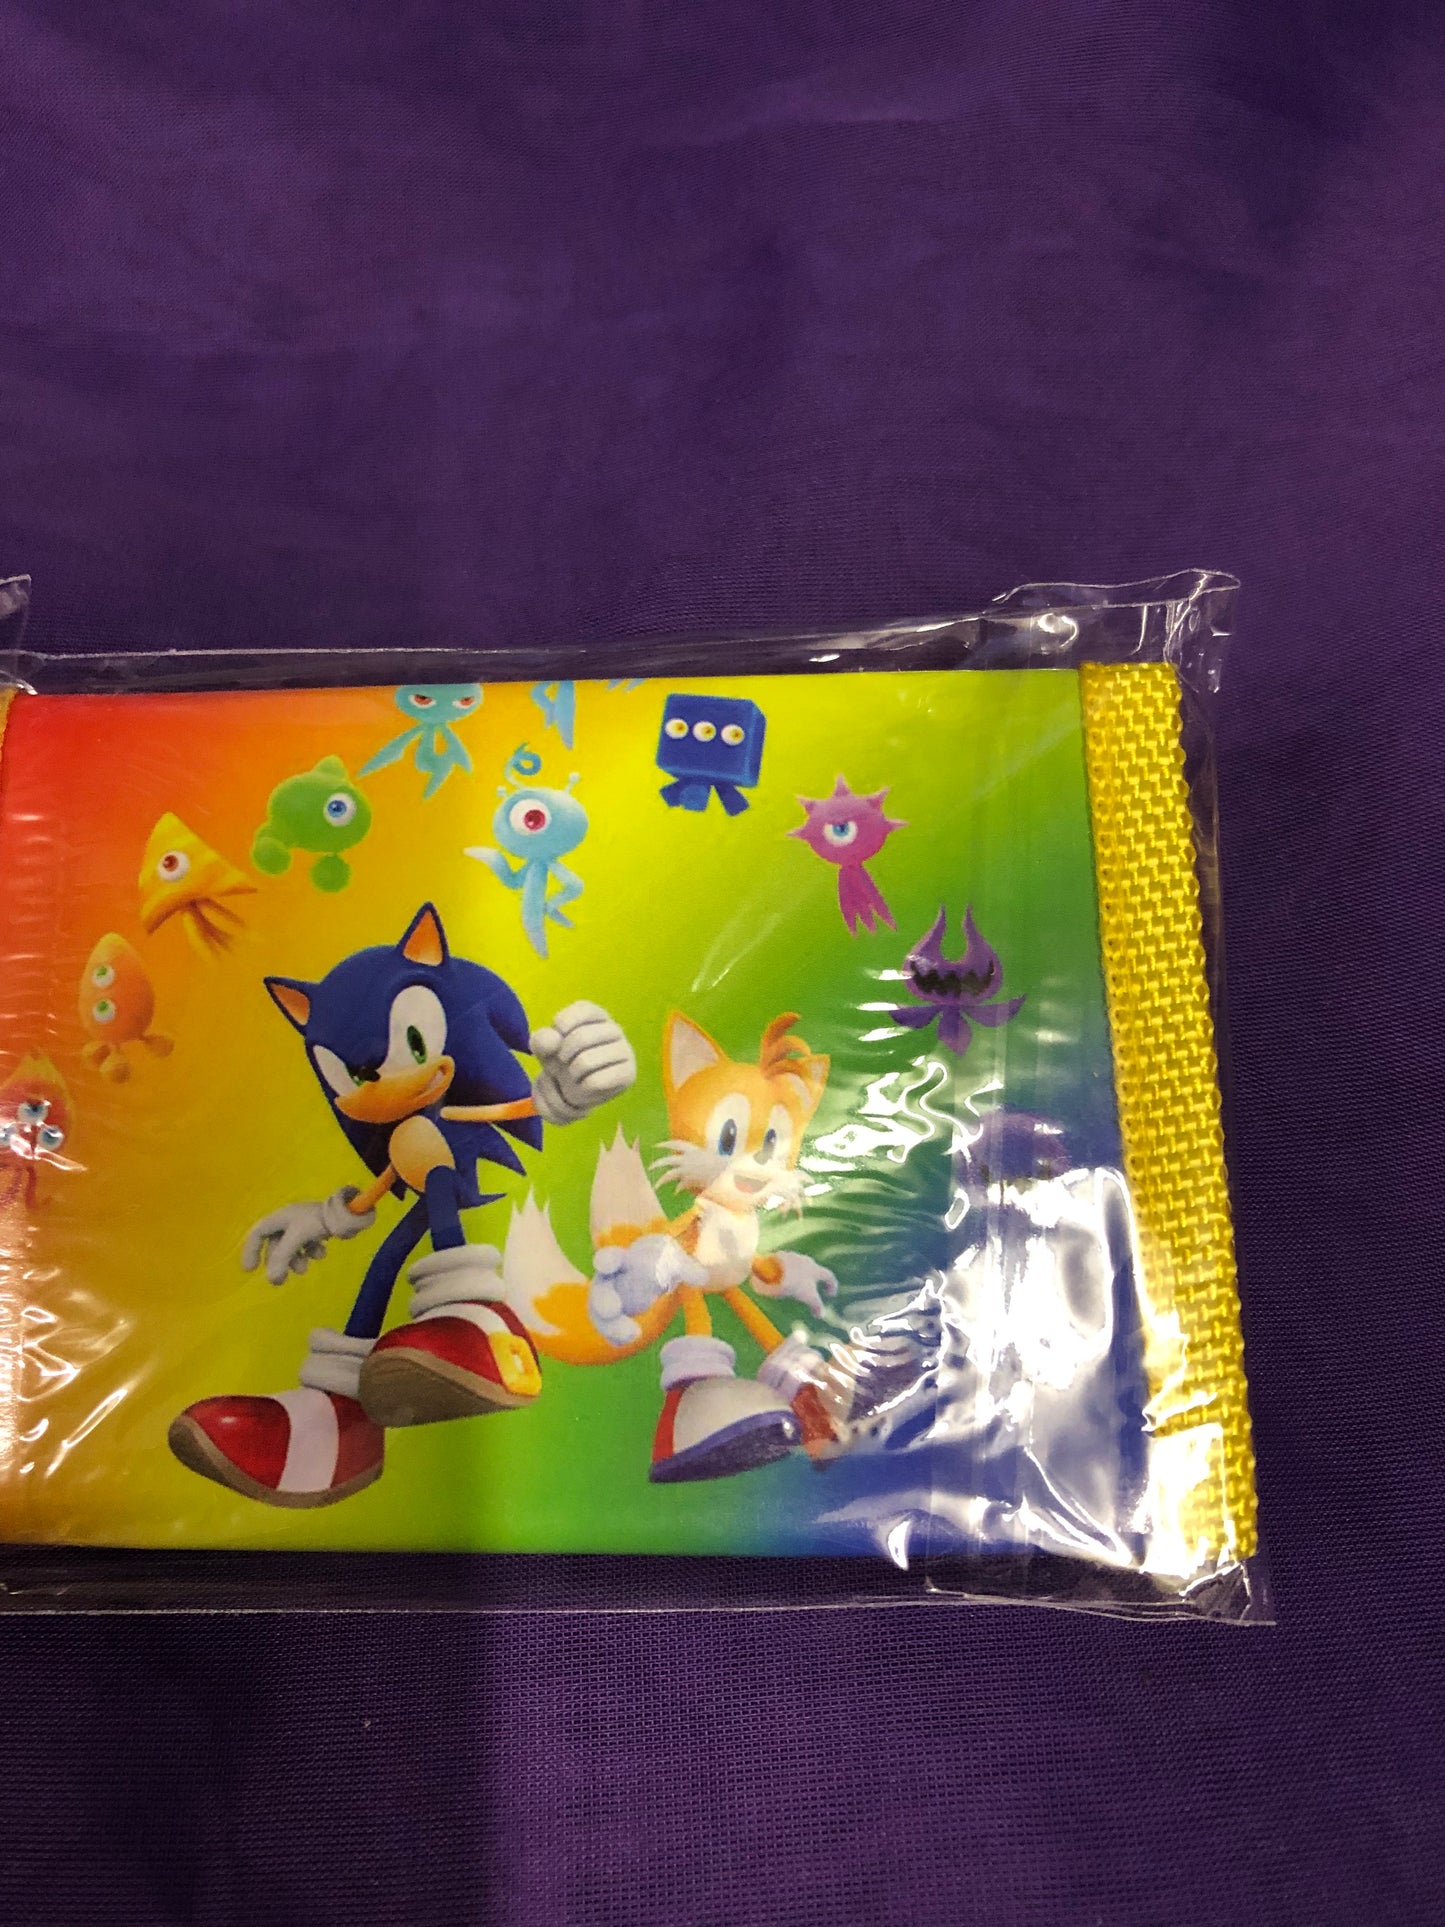 Kids Sonic Wallets "New Arrival" Colors; Sky Blue,Yellow, And Green @ 15.00 Ea.